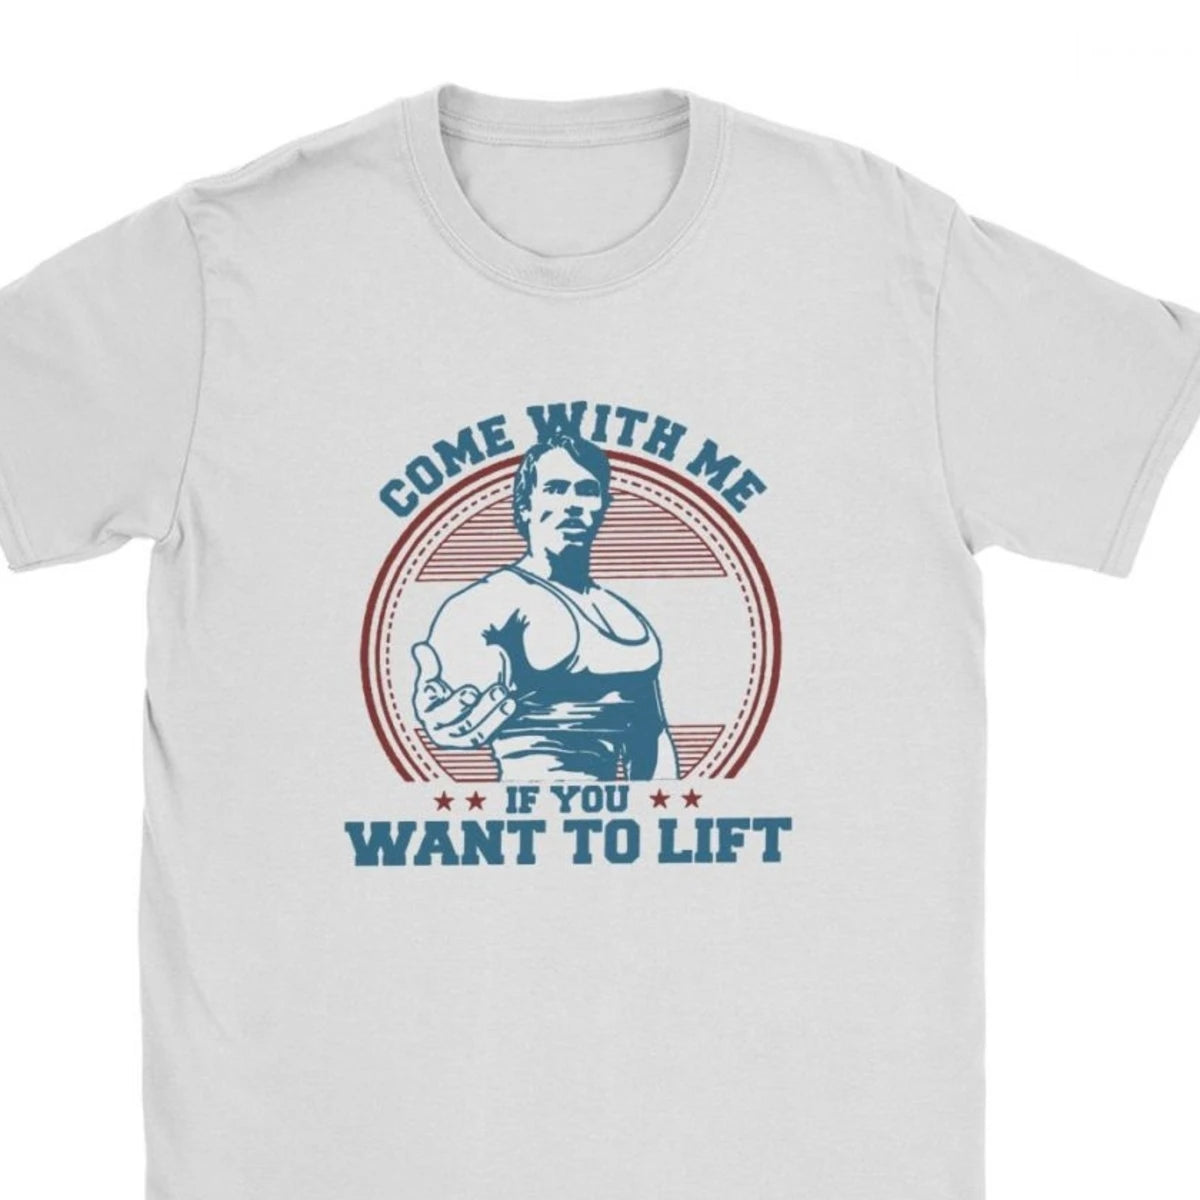 "COME WITH ME IF YOU WANT TO LIFT" Gym T-Shirt (Oversized)